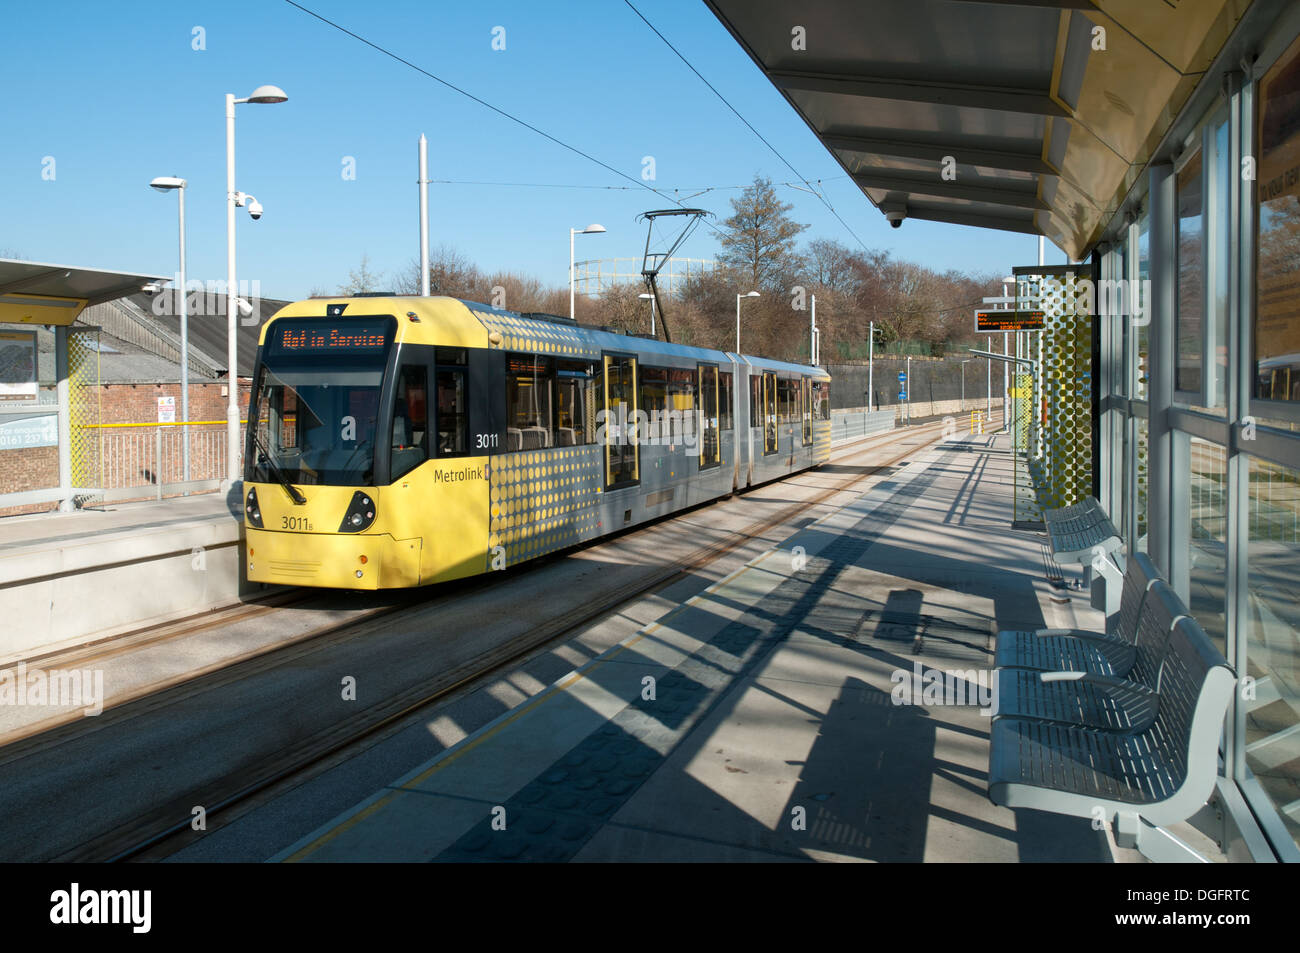 Metrolink tram at the Holt Town stop, on the East Manchester Line, Ancoats, Manchester, England, UK Stock Photo